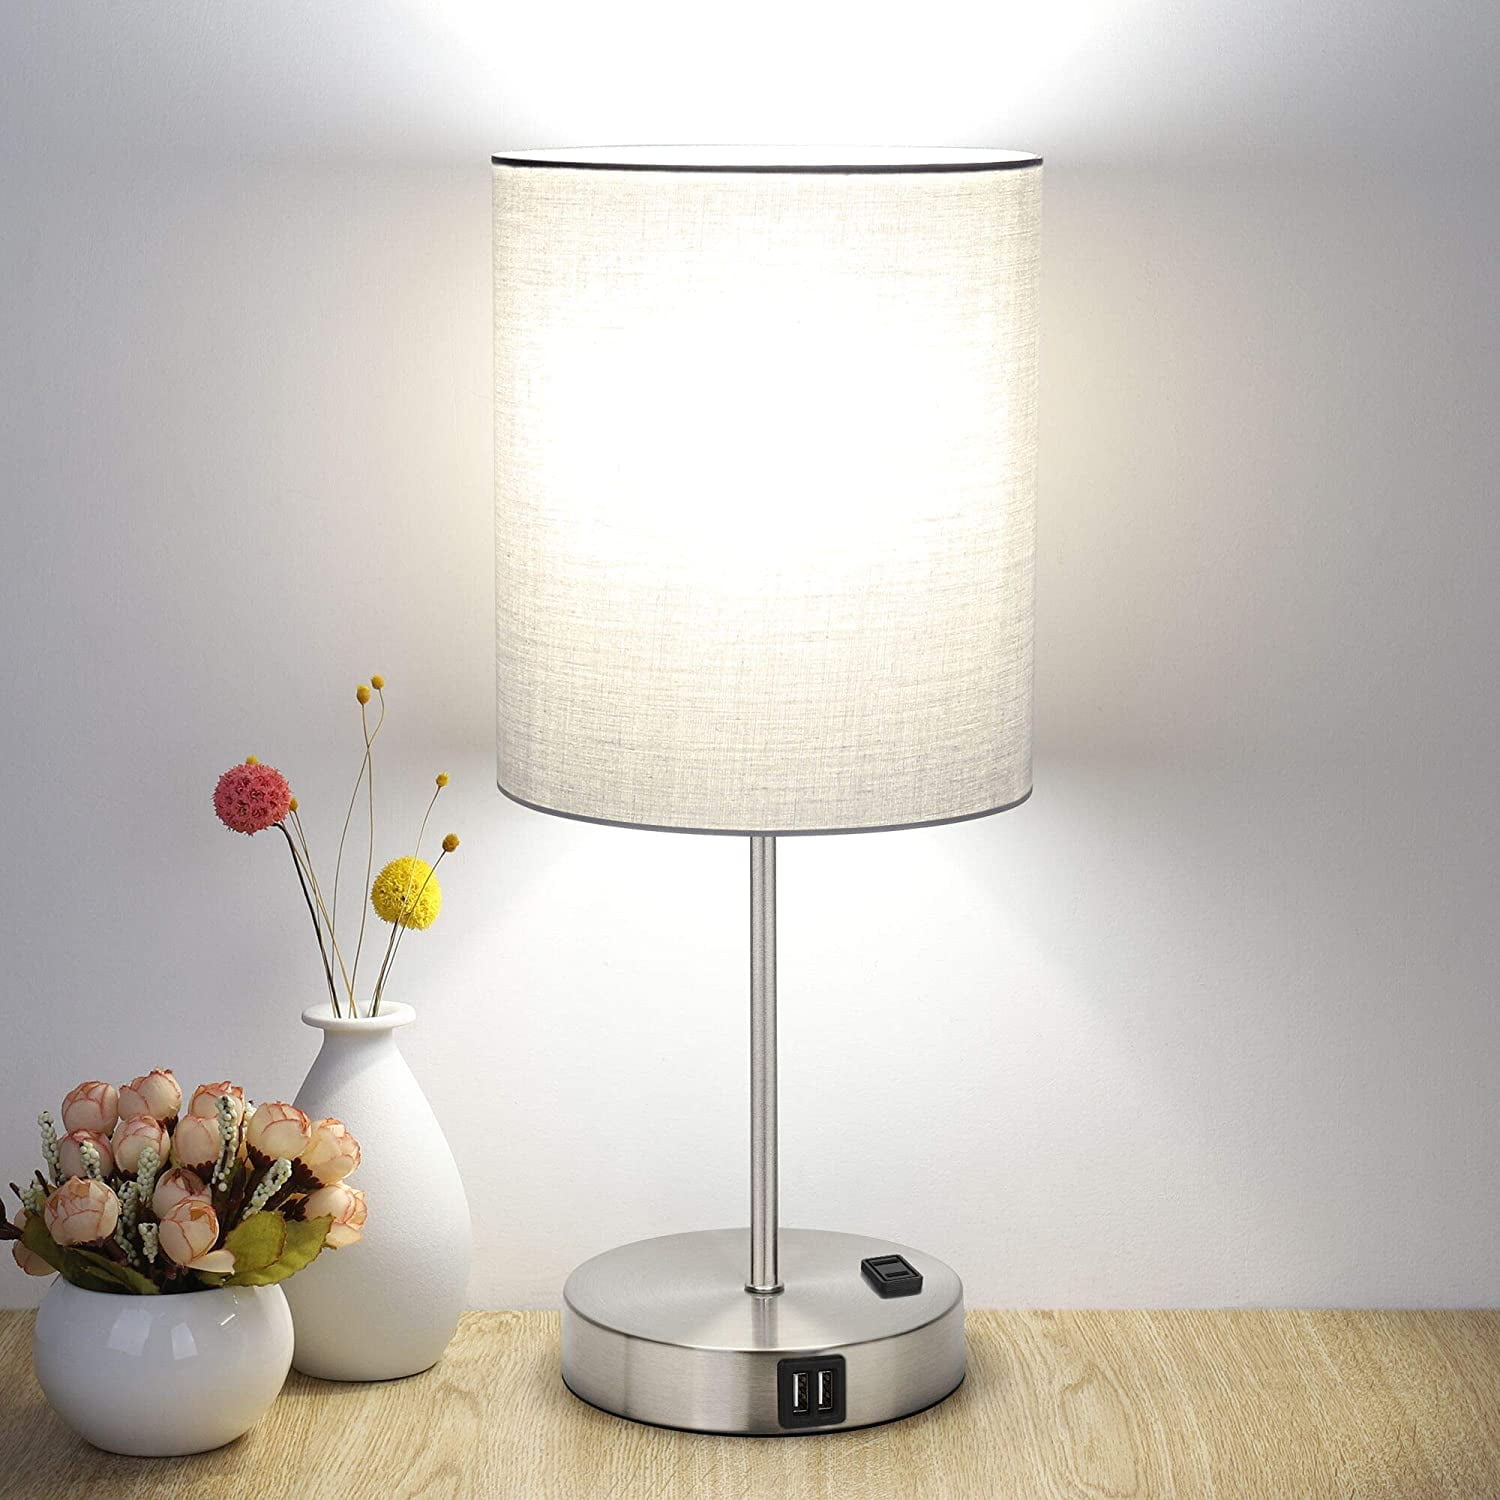 Buy Touch Control Table Lamp 3 Way Dimmable Bedside Desk Lamp With 2 Fast Usb Ports And Ac